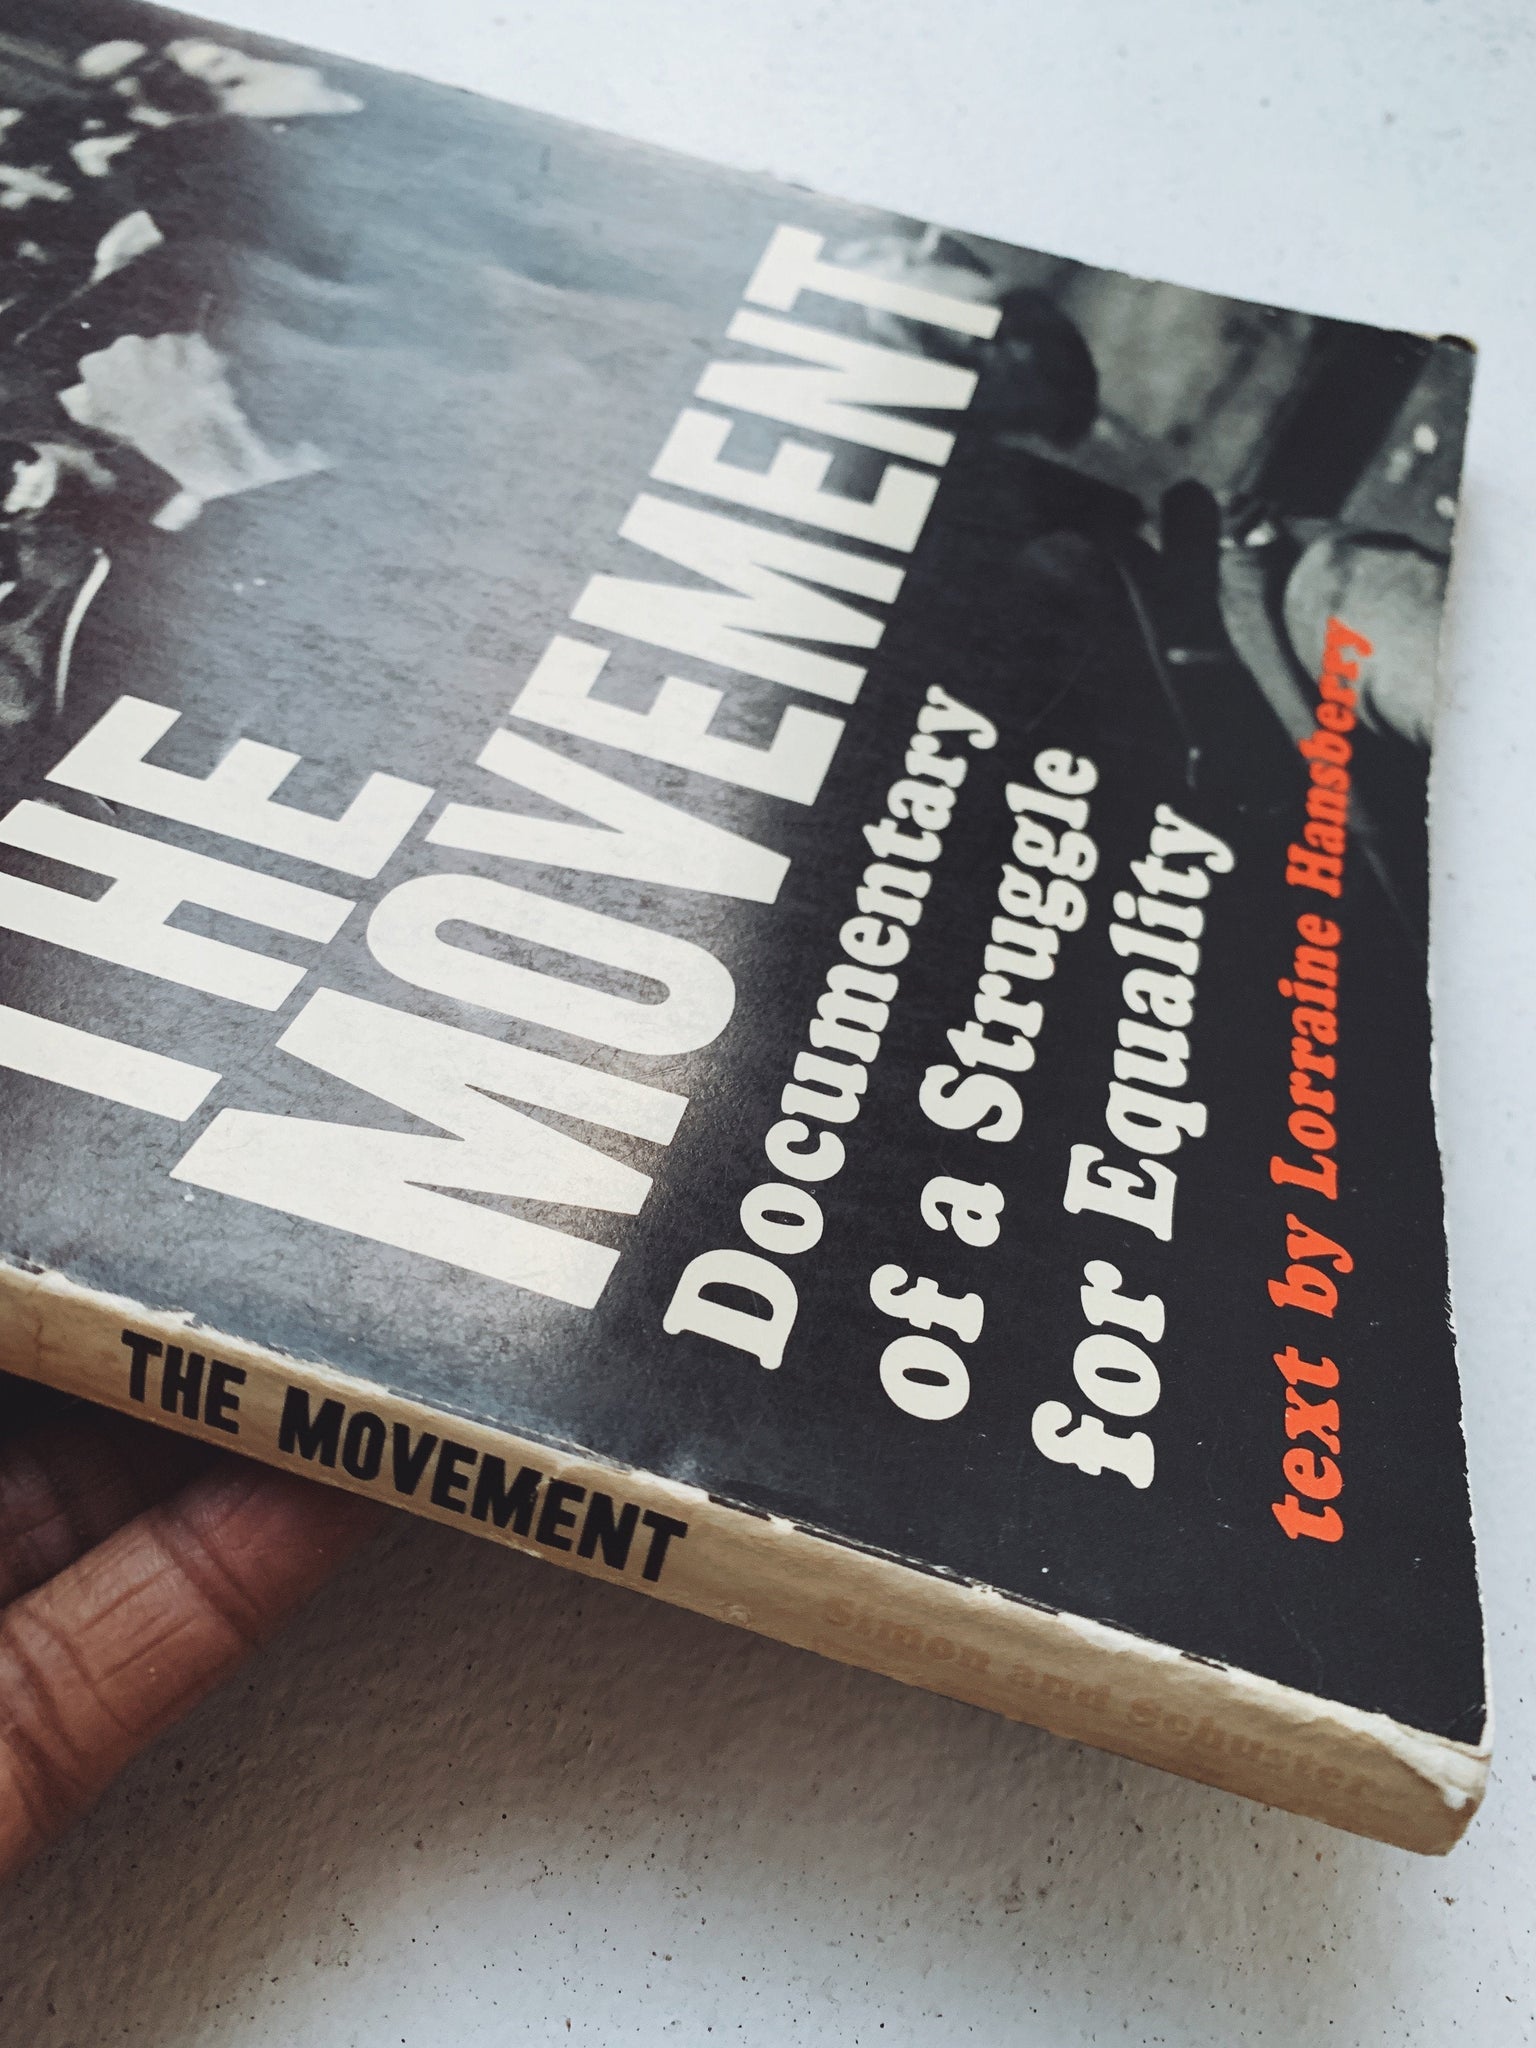 Vintage Rare Softcover “The Movement: Documentary of A Struggle For Equality" by Lorraine Hansberry (First Edition, 1964)